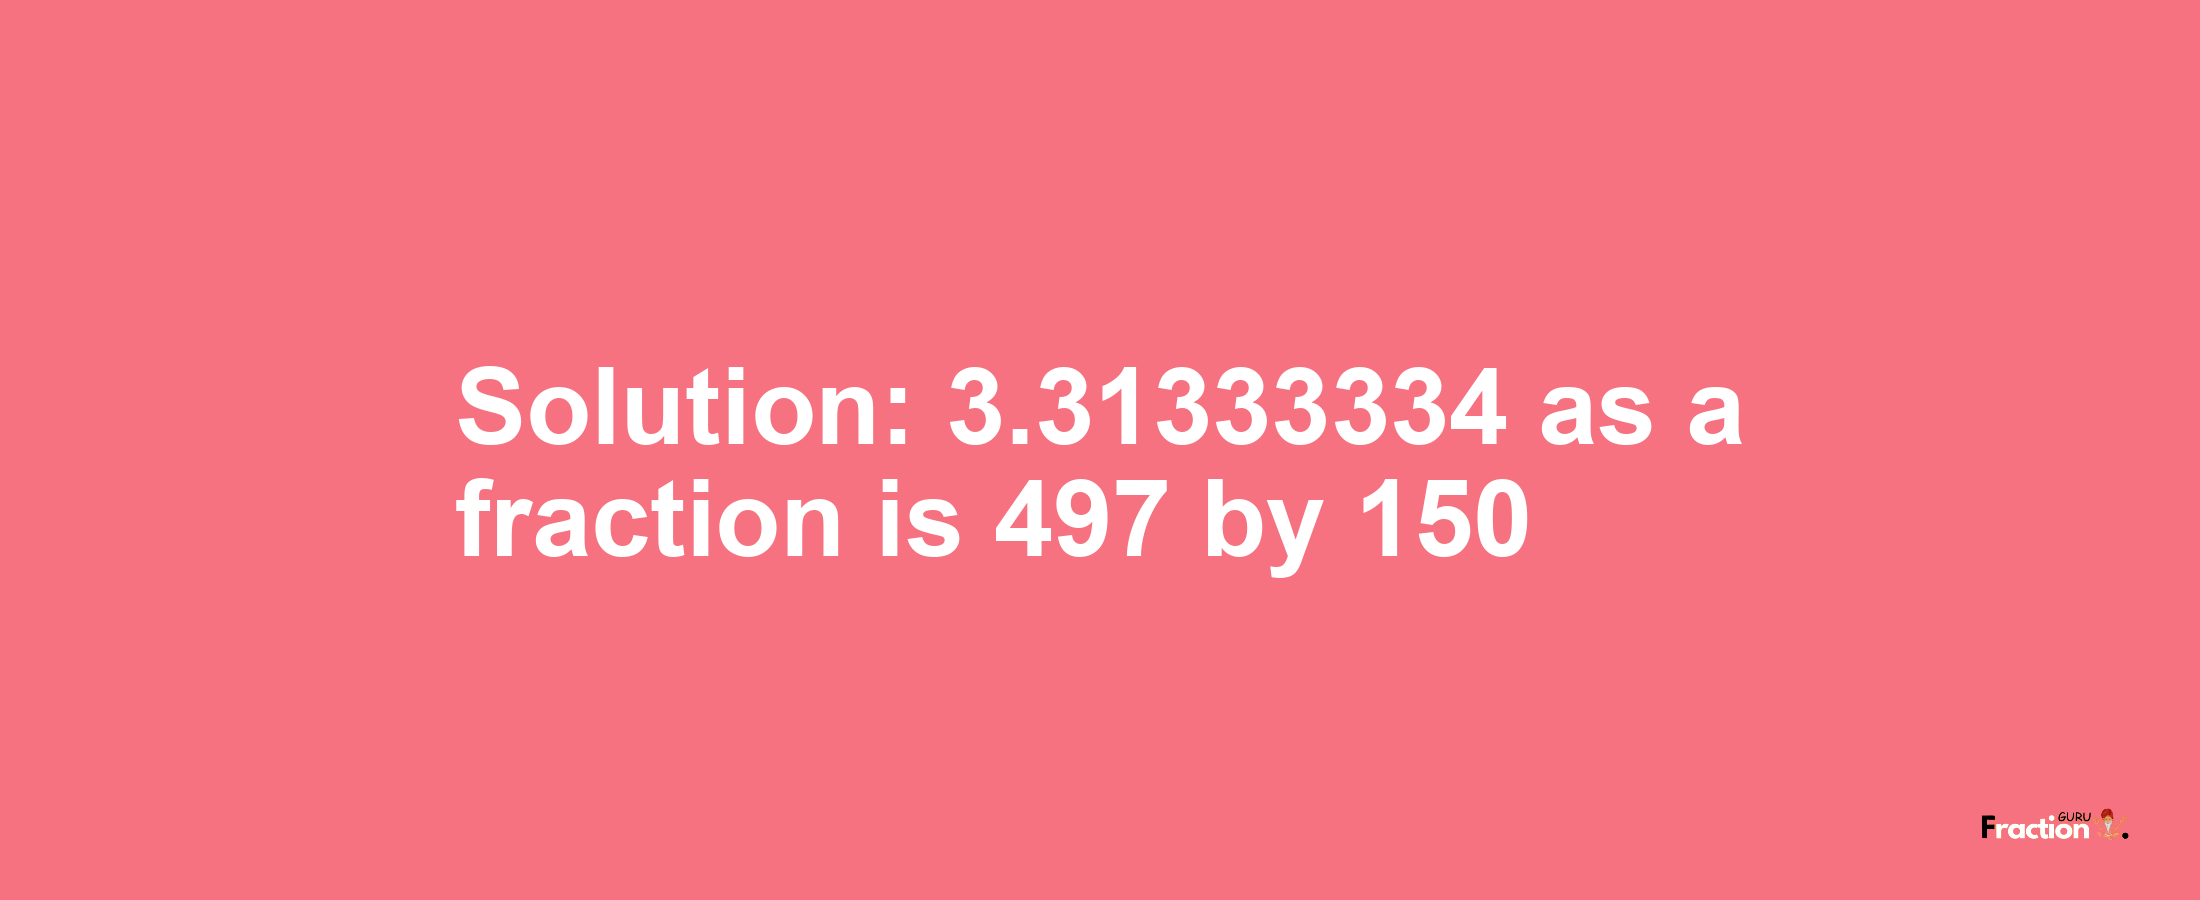 Solution:3.31333334 as a fraction is 497/150